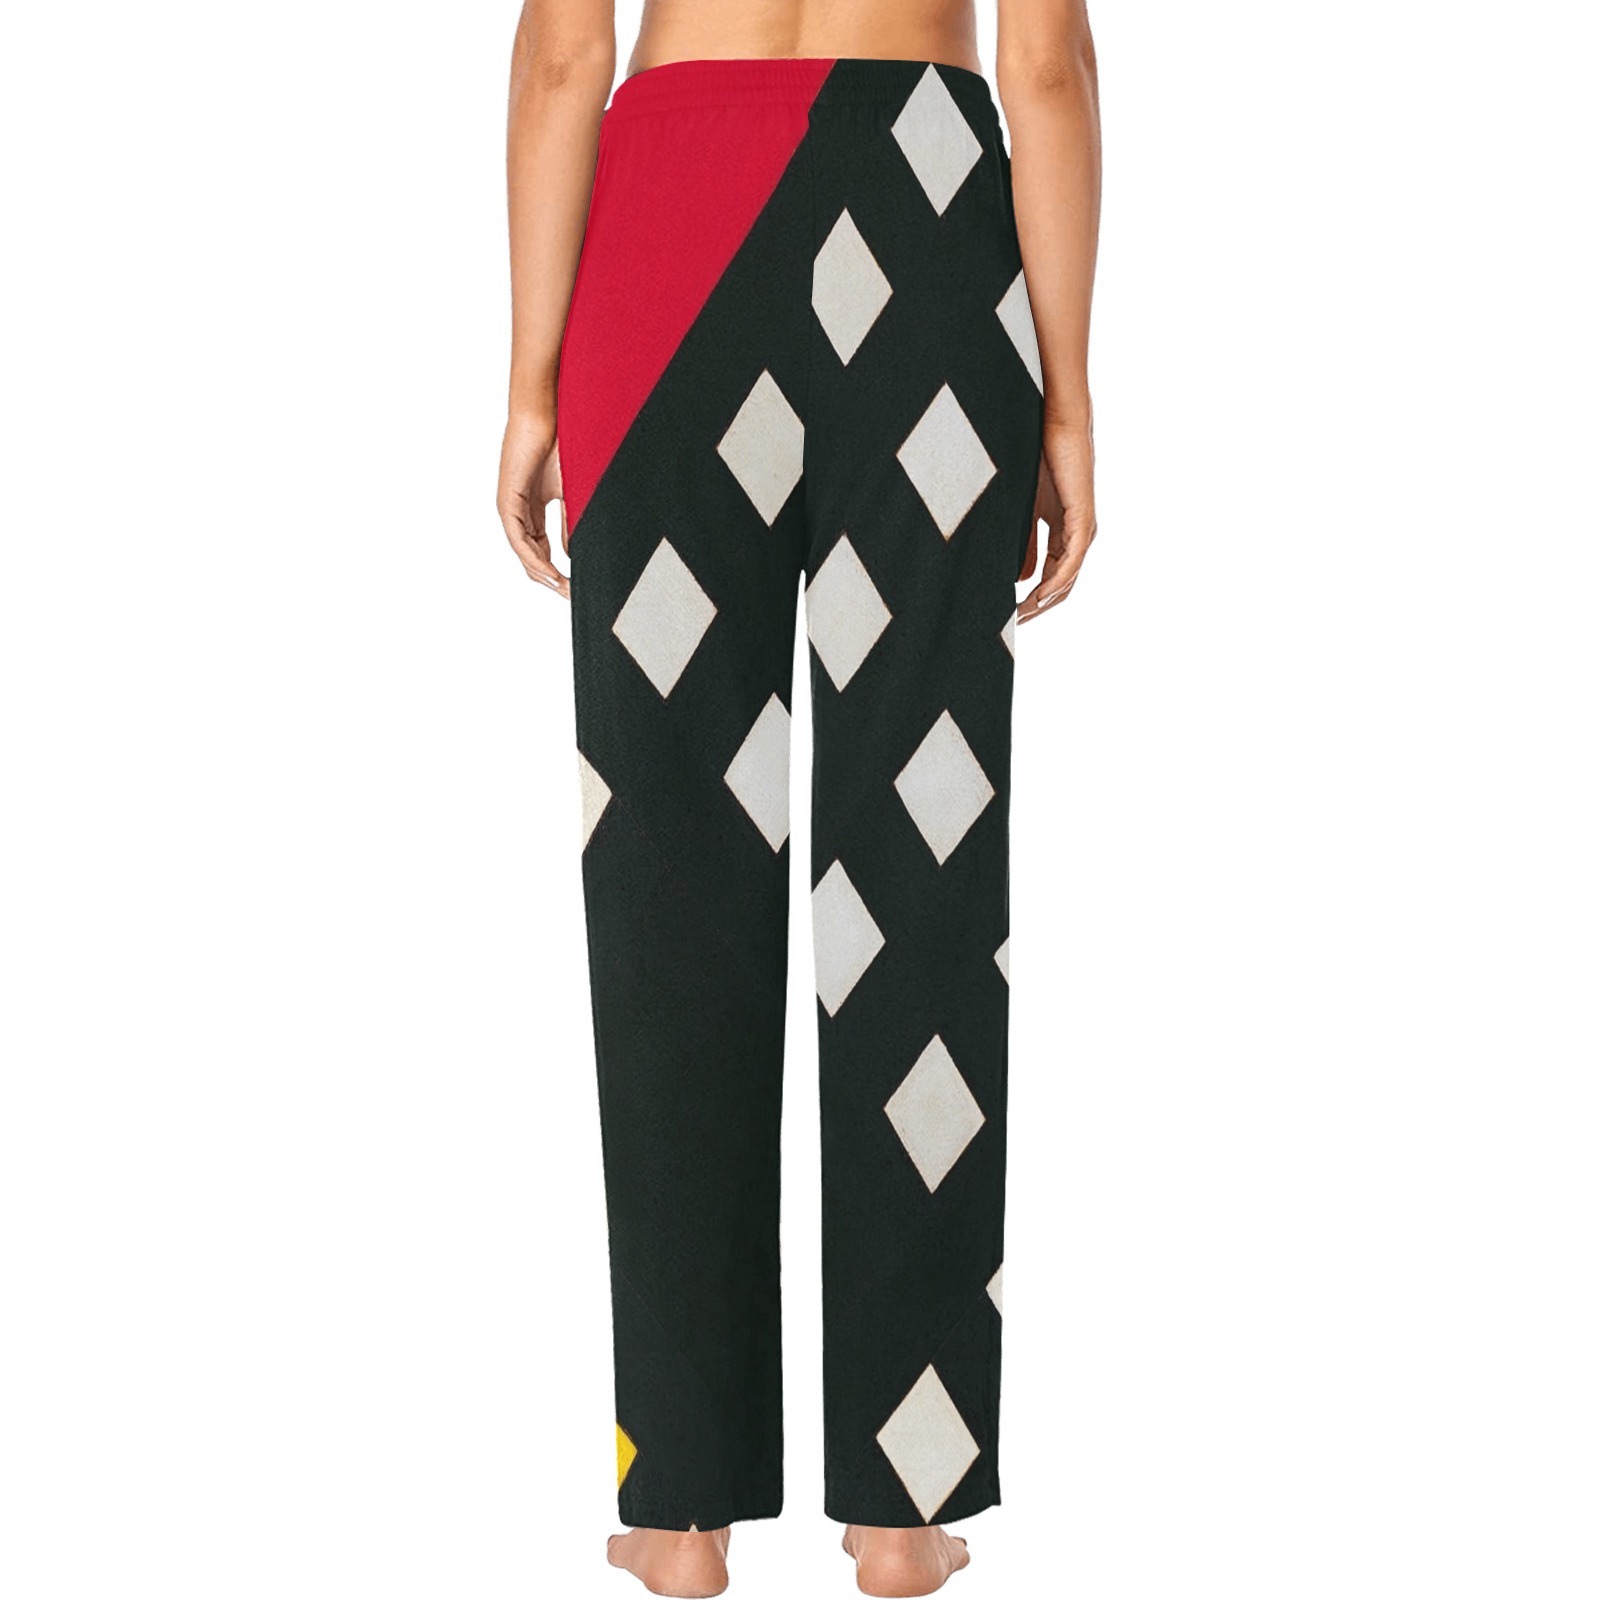 Counter-composition XV by Theo van Doesburg- Women's Pajama Trousers